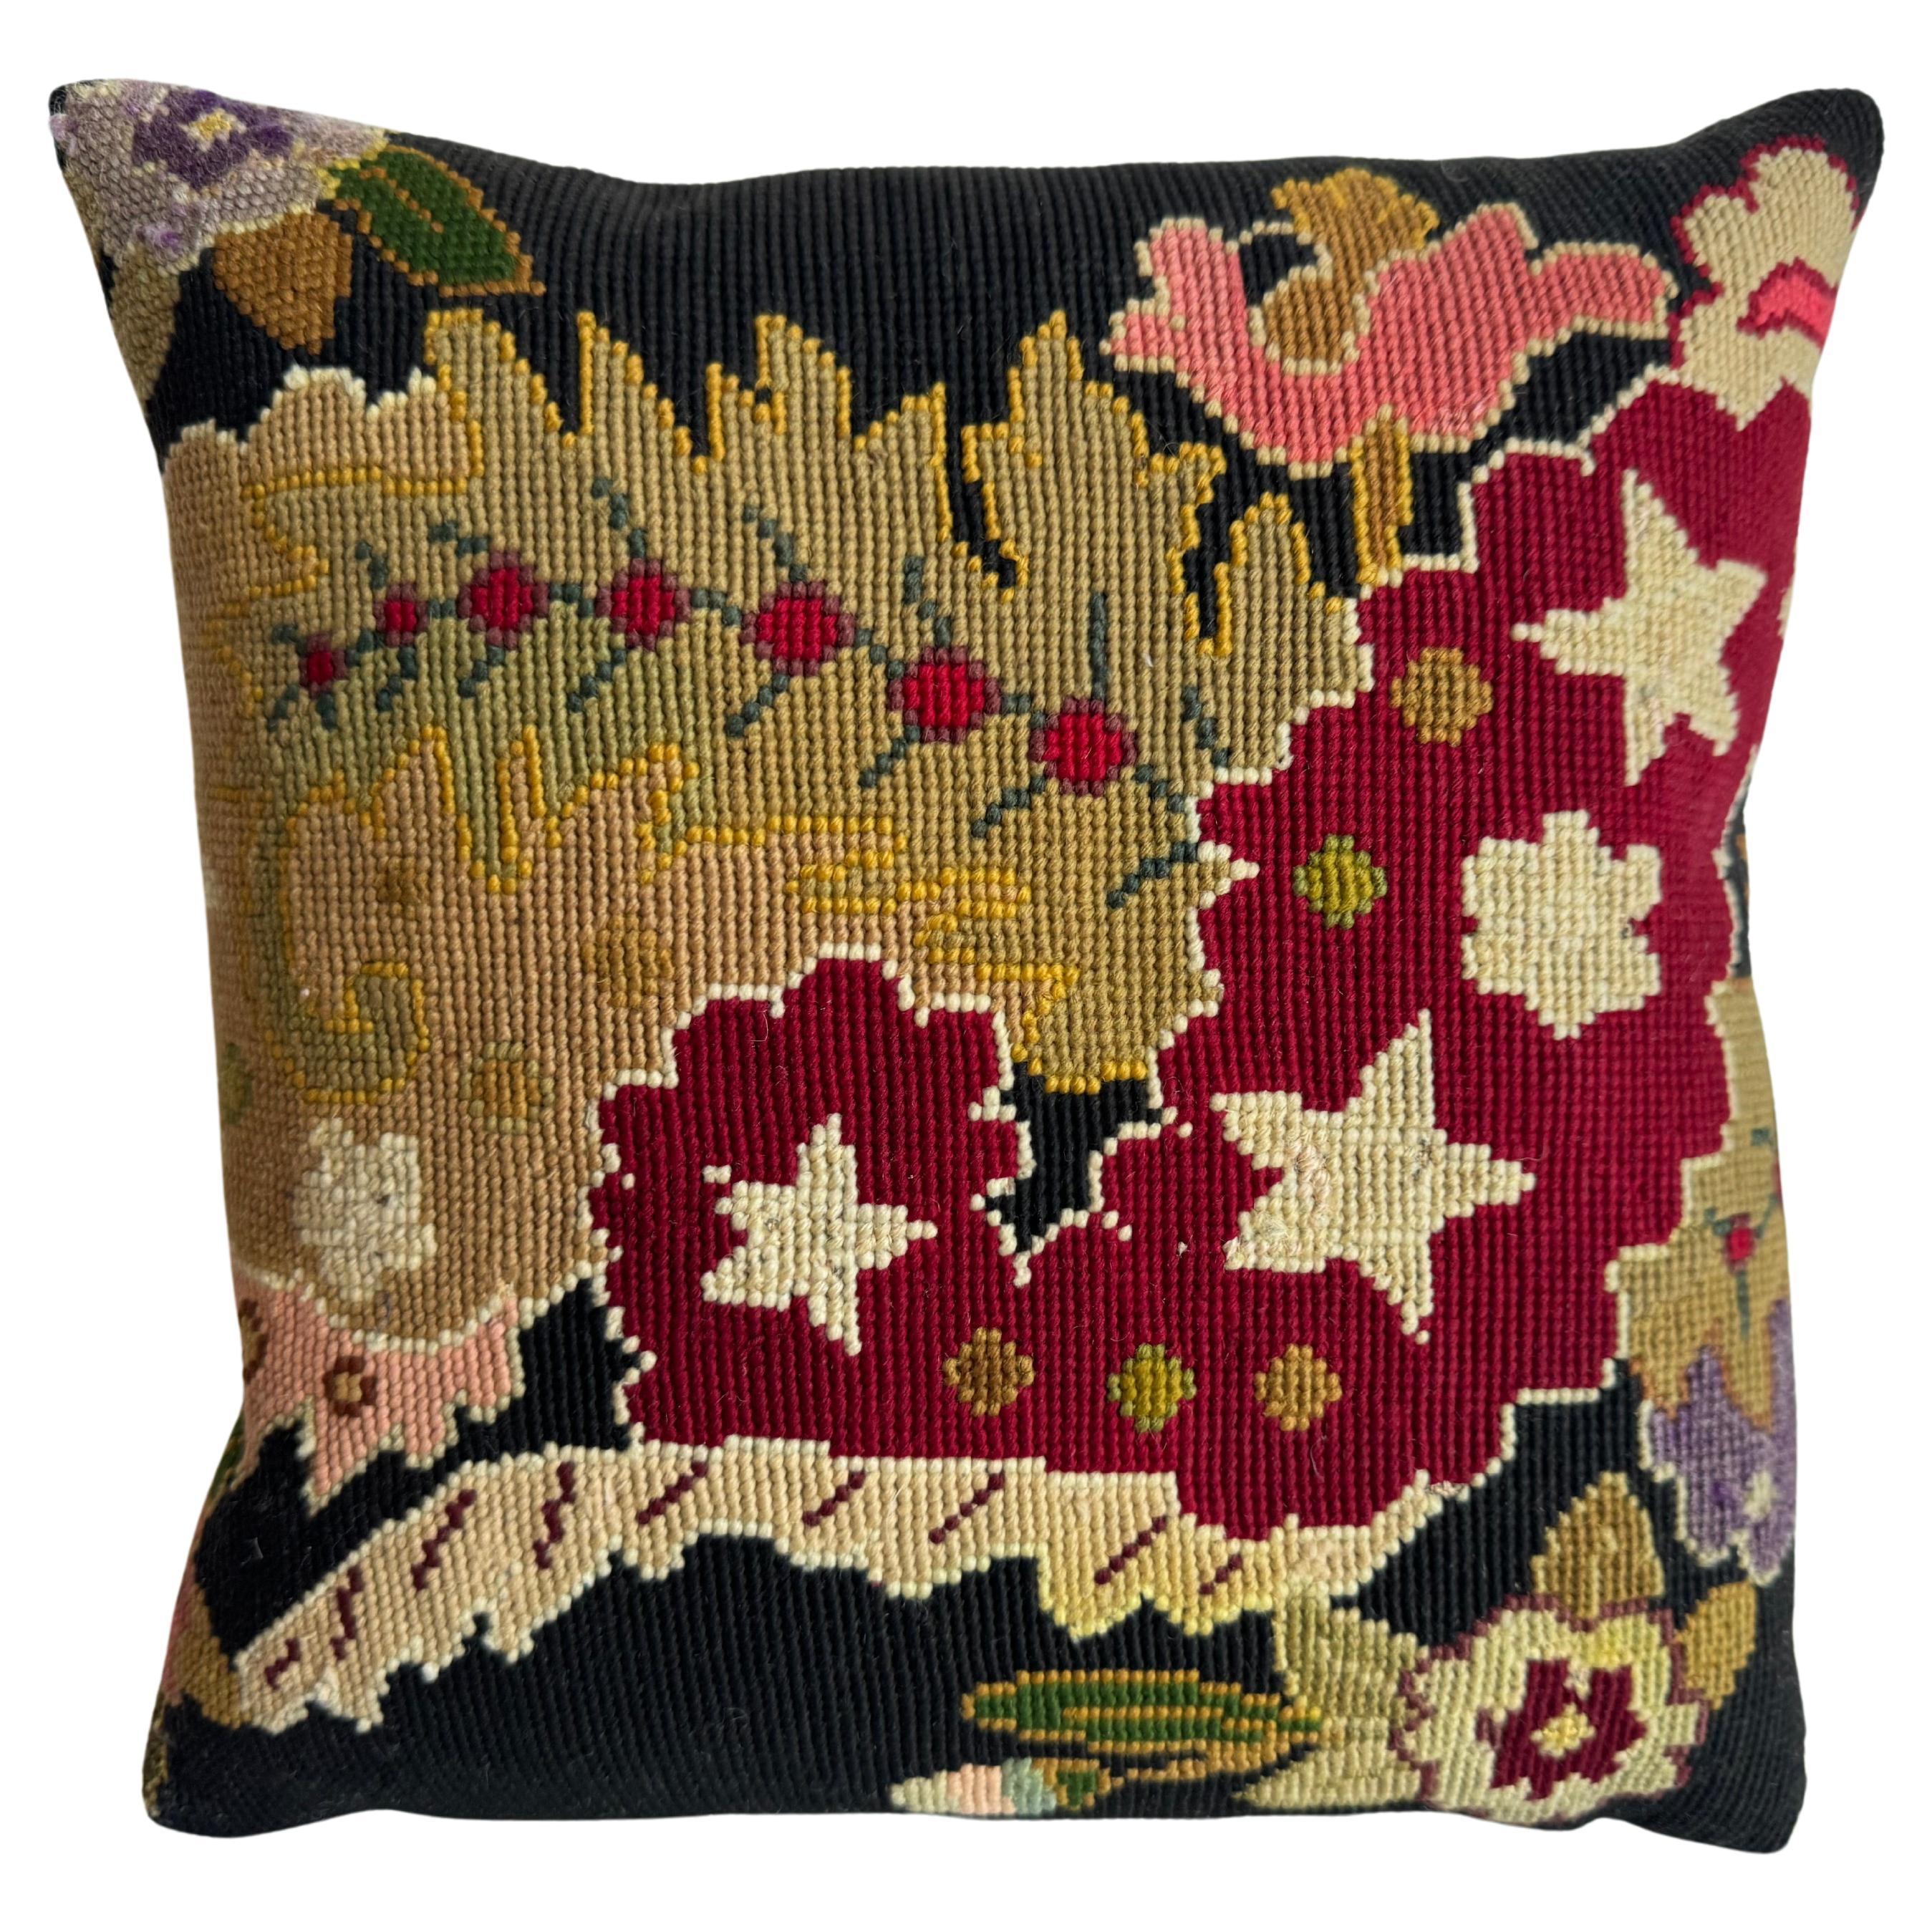 1850 English Needle Work Pillow - 12" X 12' For Sale